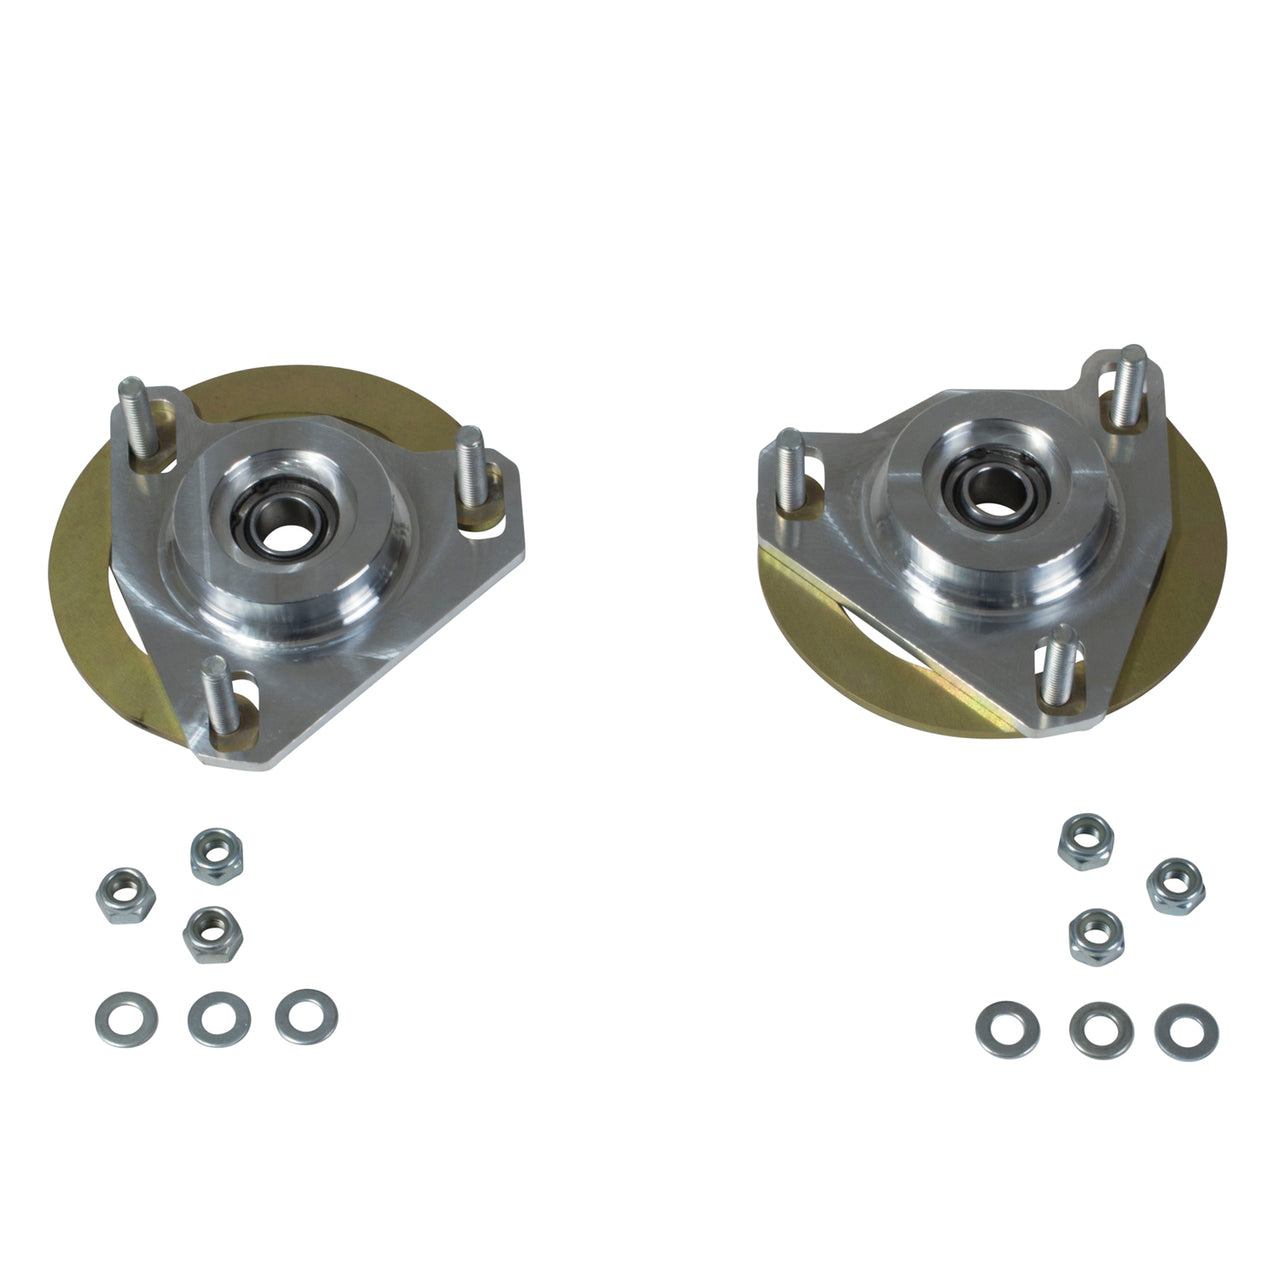 2015-2020 MUSTANG FRONT CASTER CAMBER PLATE KIT